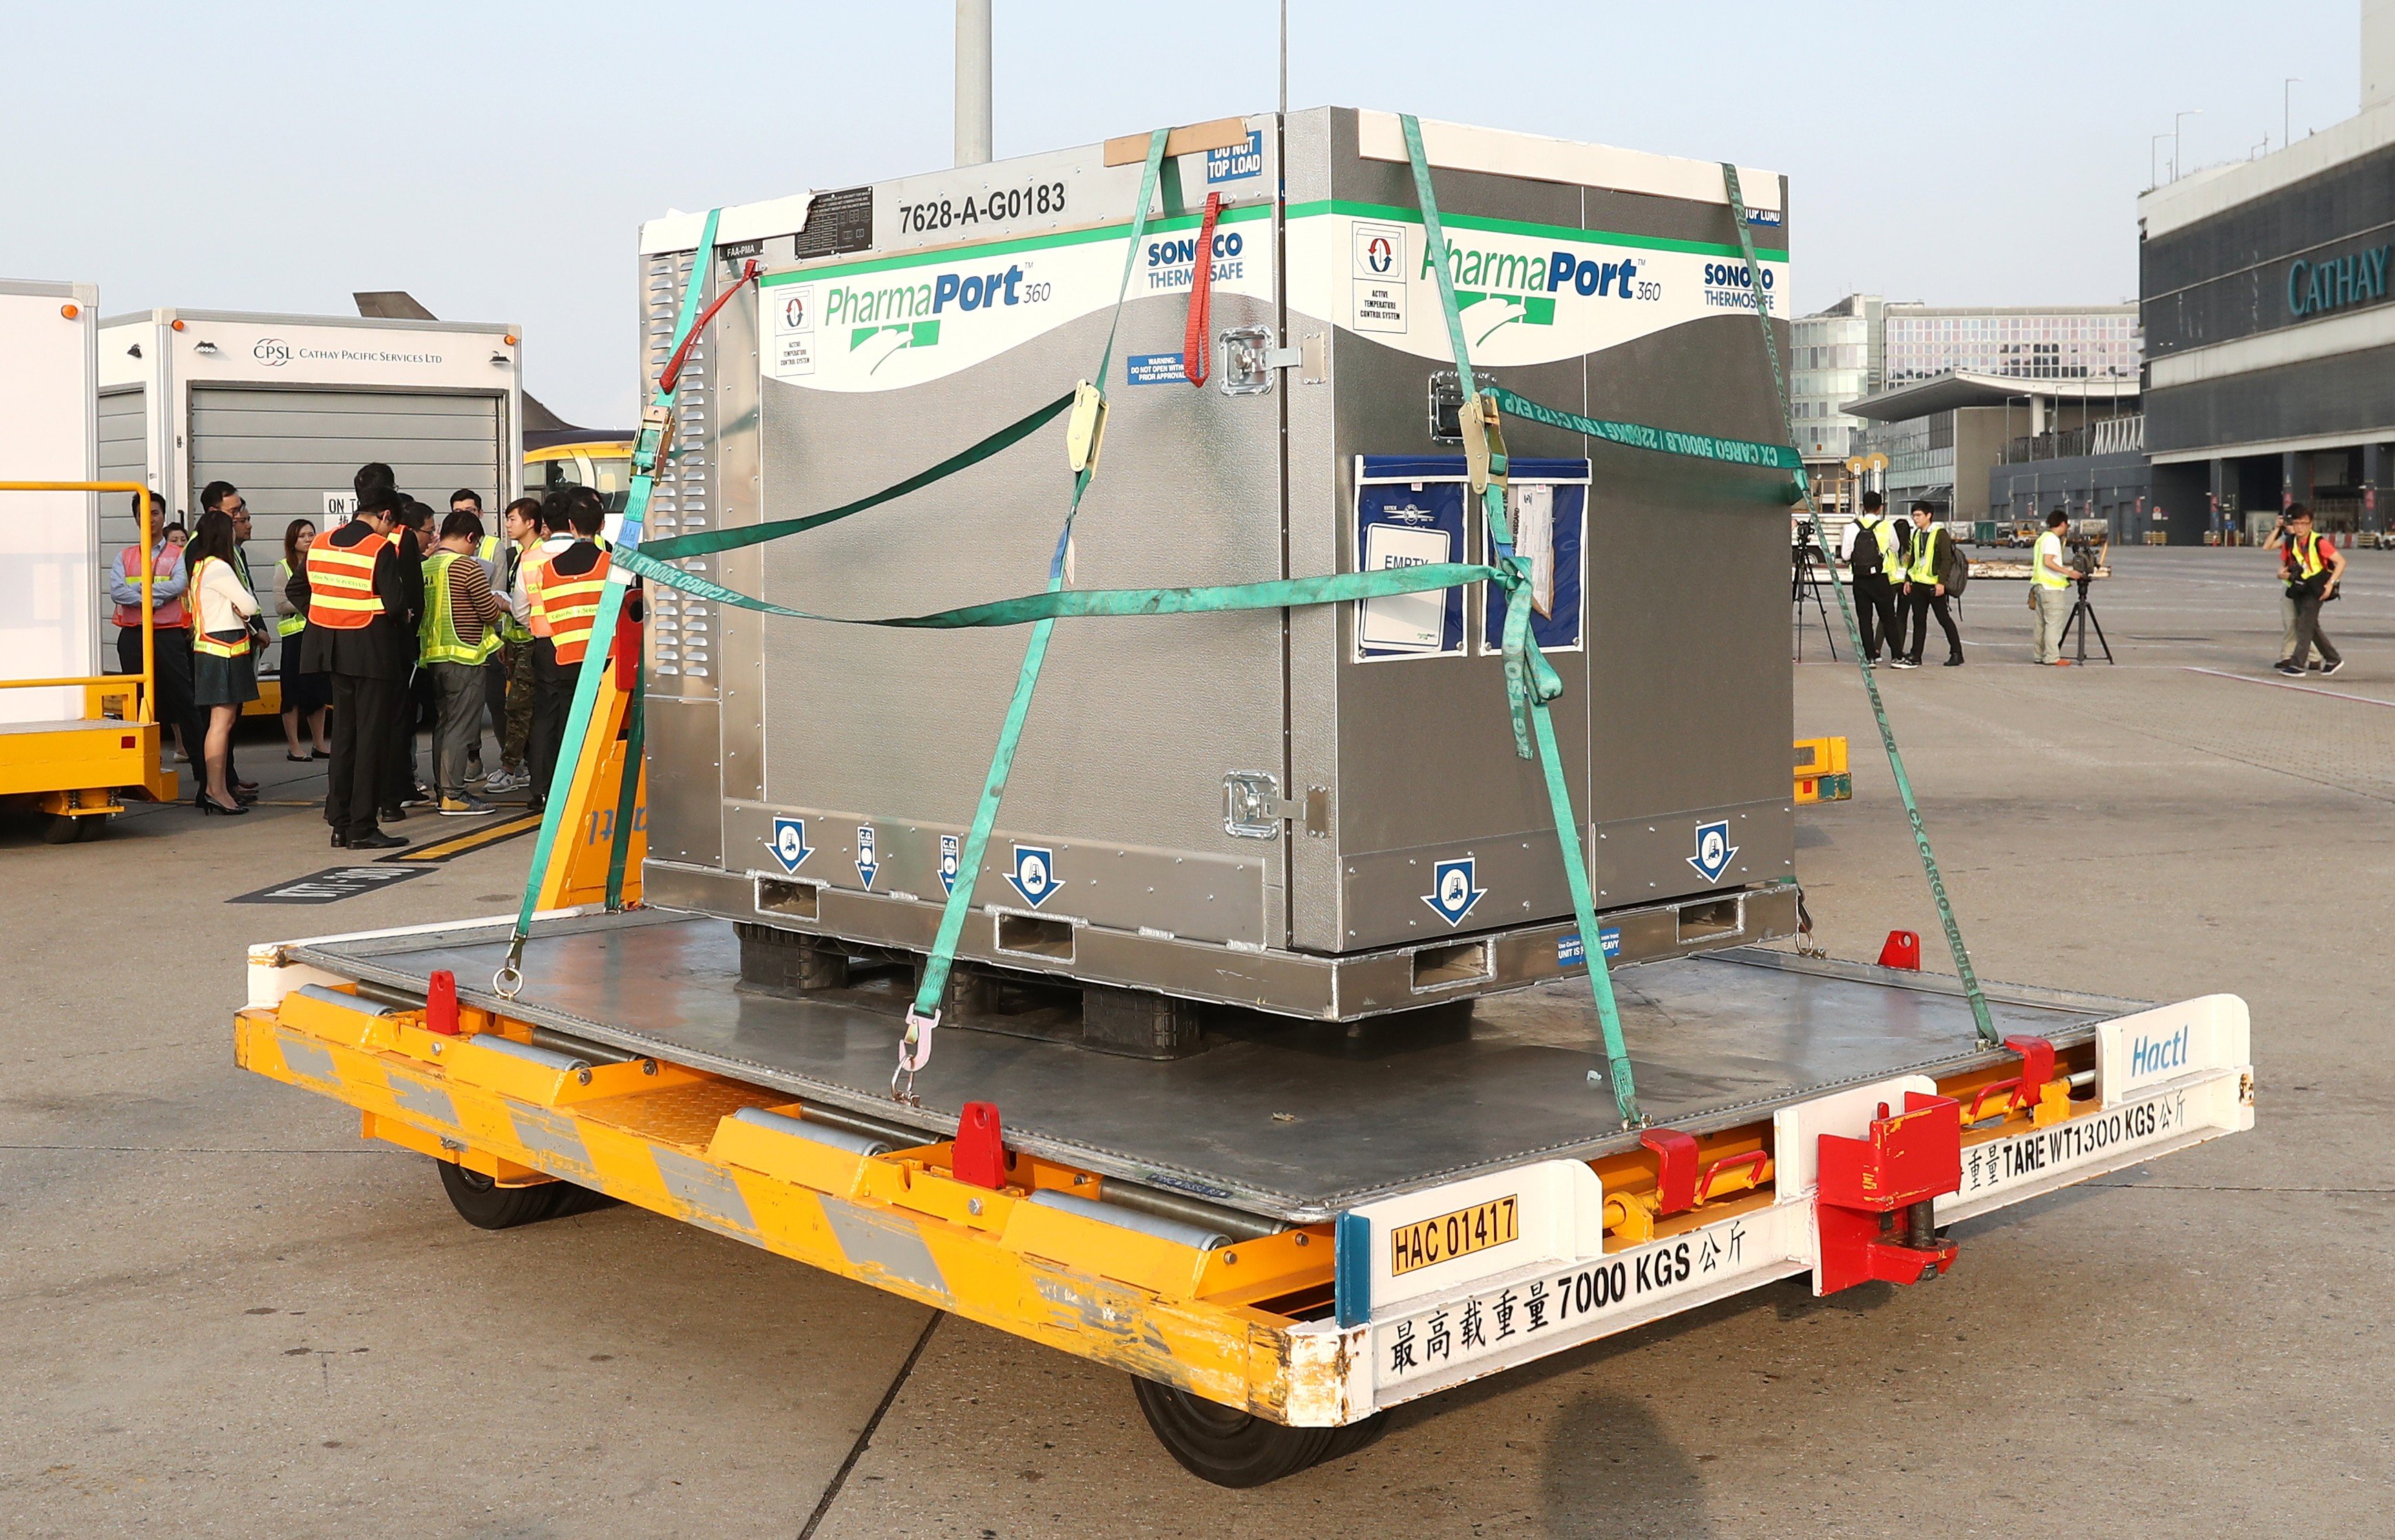 A loading crate in which temperature can be controlled for the transport of sensitive medical cargo. Photo: Nora Tam